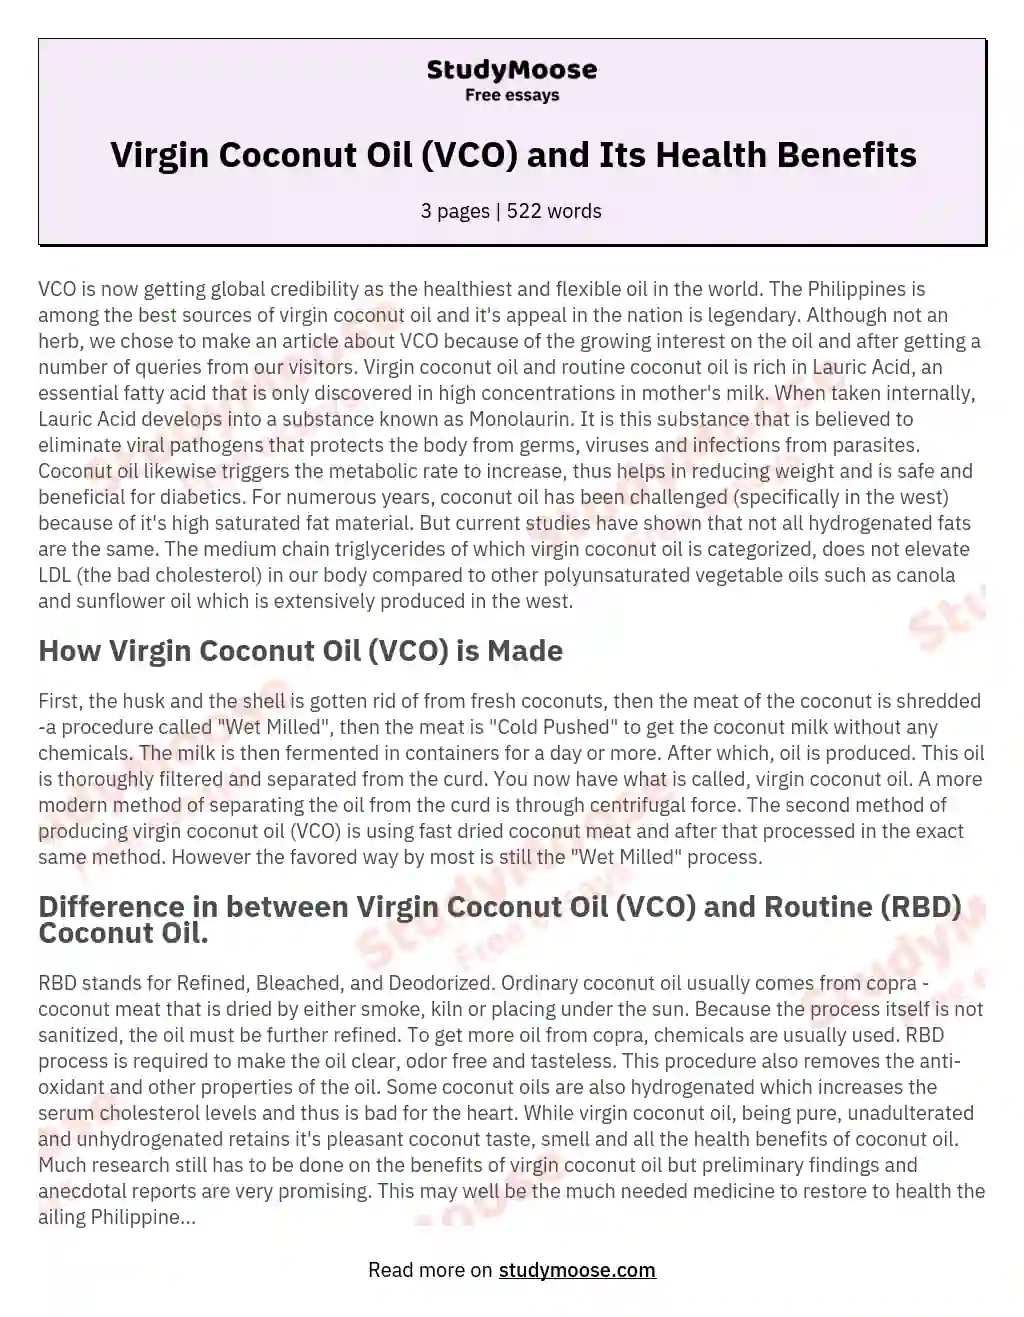 Virgin Coconut Oil (VCO) and Its Health Benefits essay